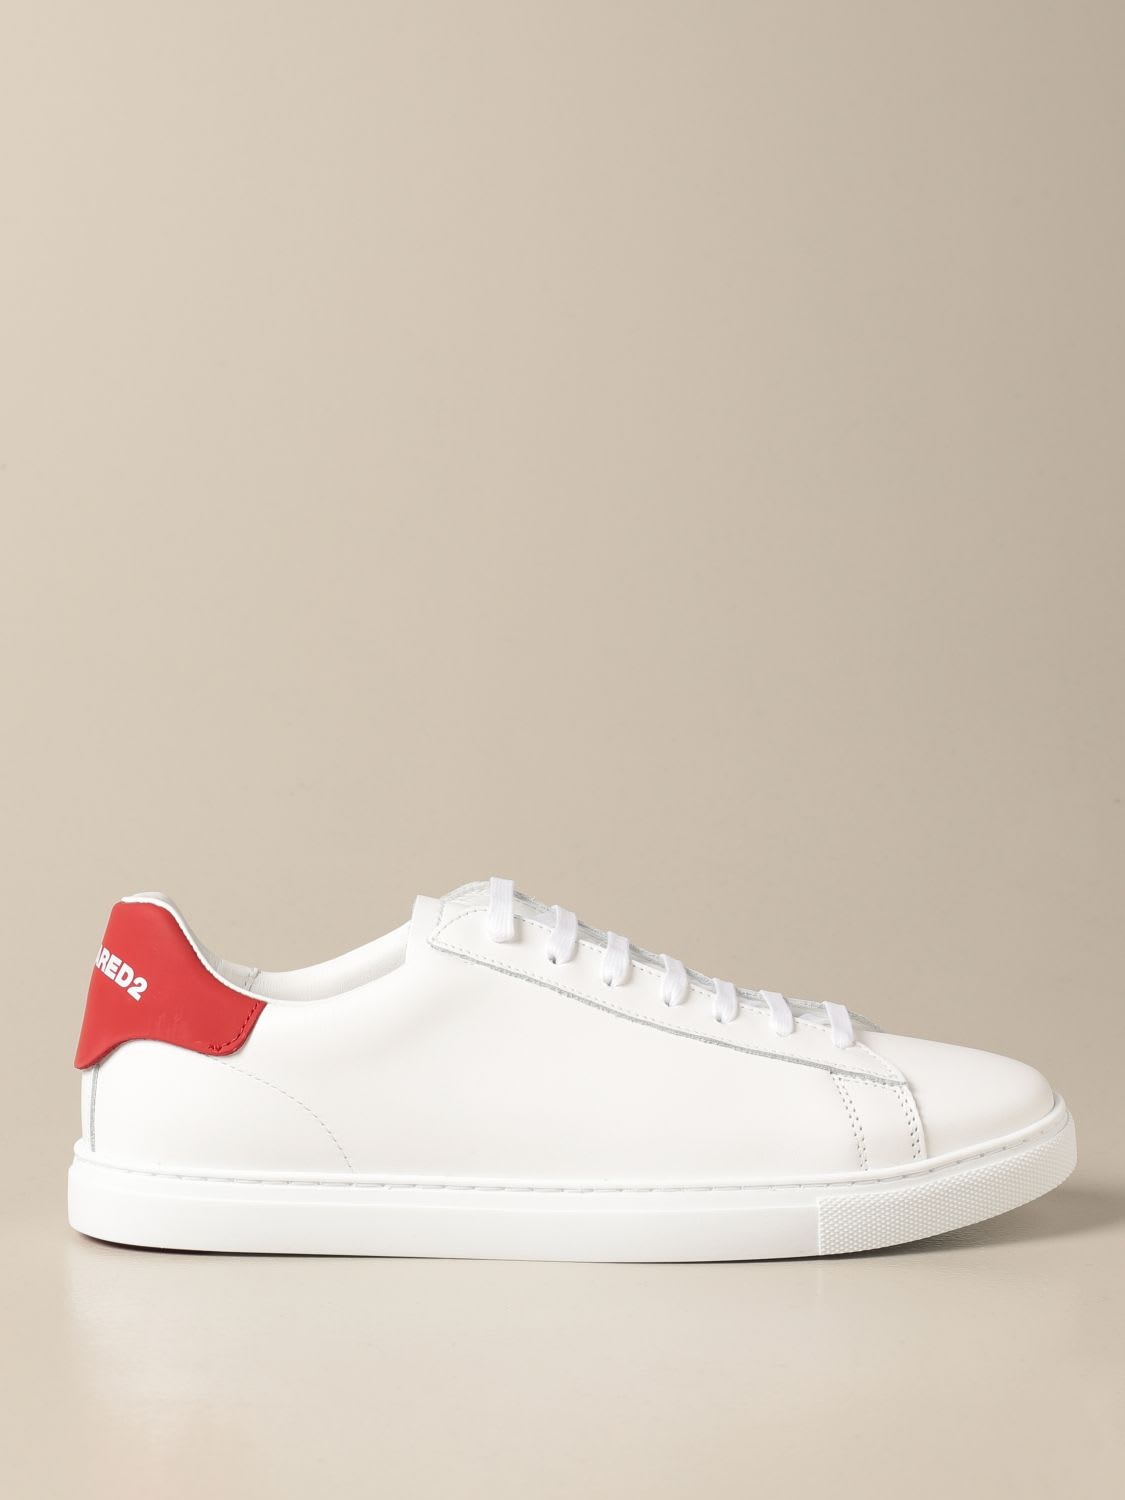 DSQUARED2 SNEAKERS IN LEATHER WITH LOGO,SNM0005 11570001-CALF M1747